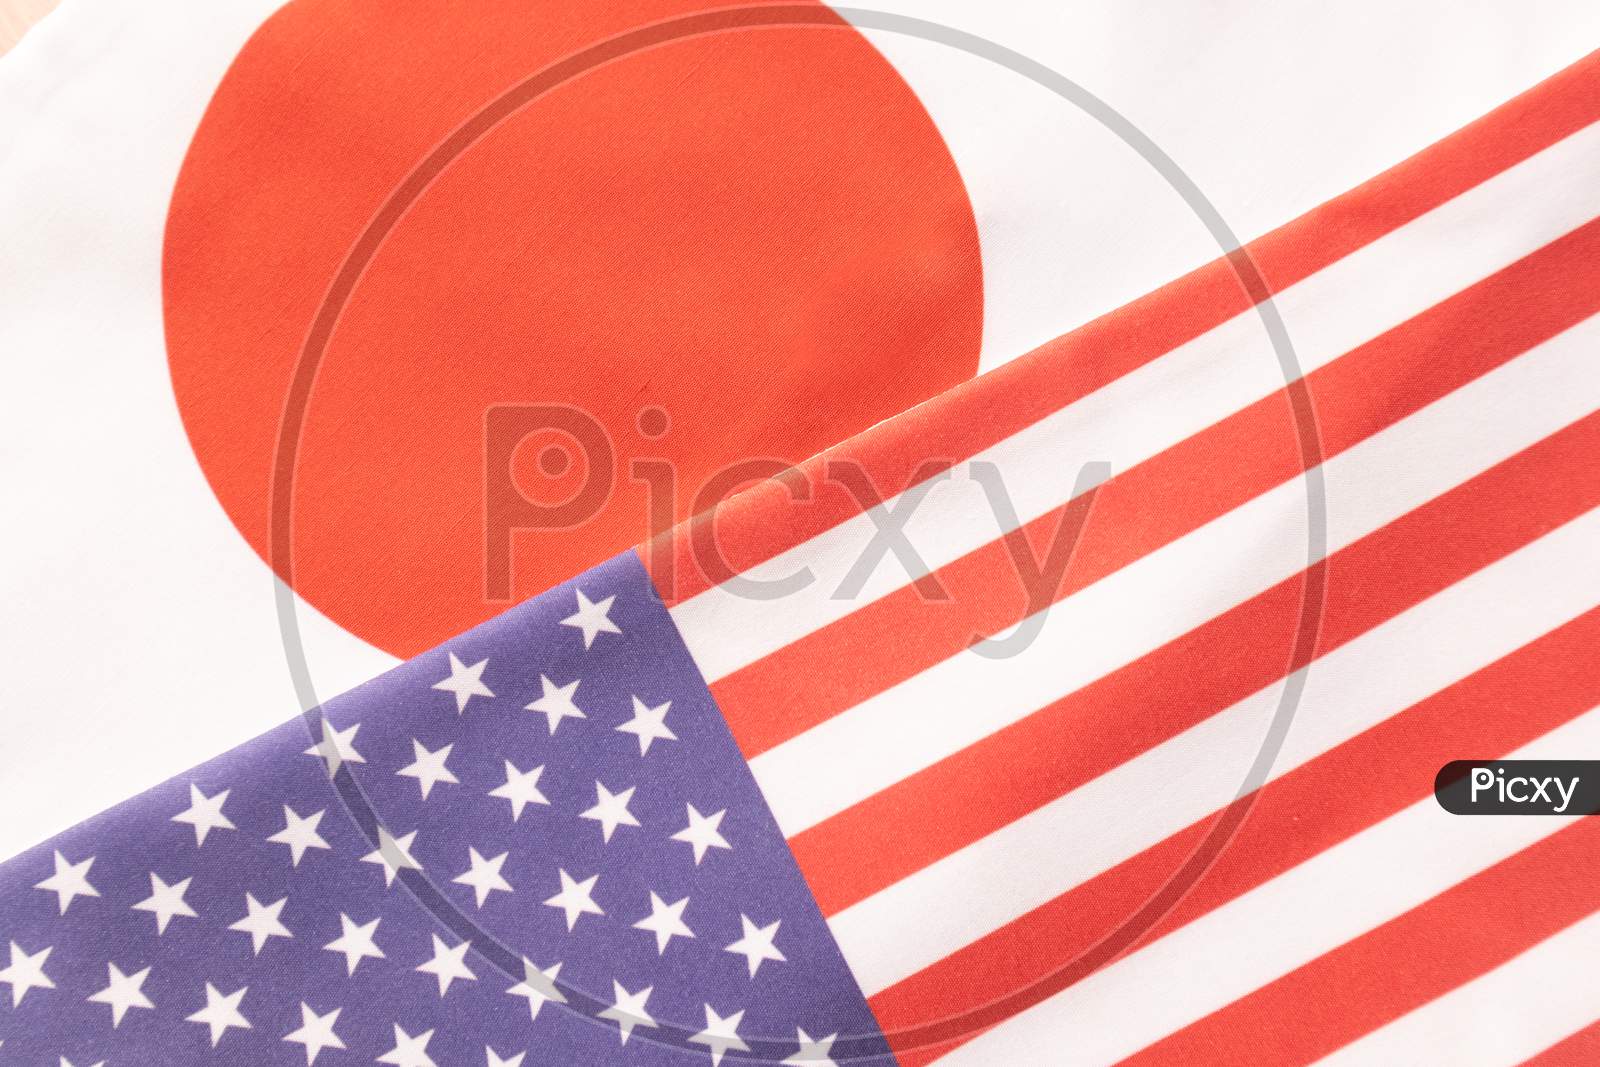 Concept Of Bilateral Relationship Between Two Countries Showing With Two Flags: The United States Of America And Japan